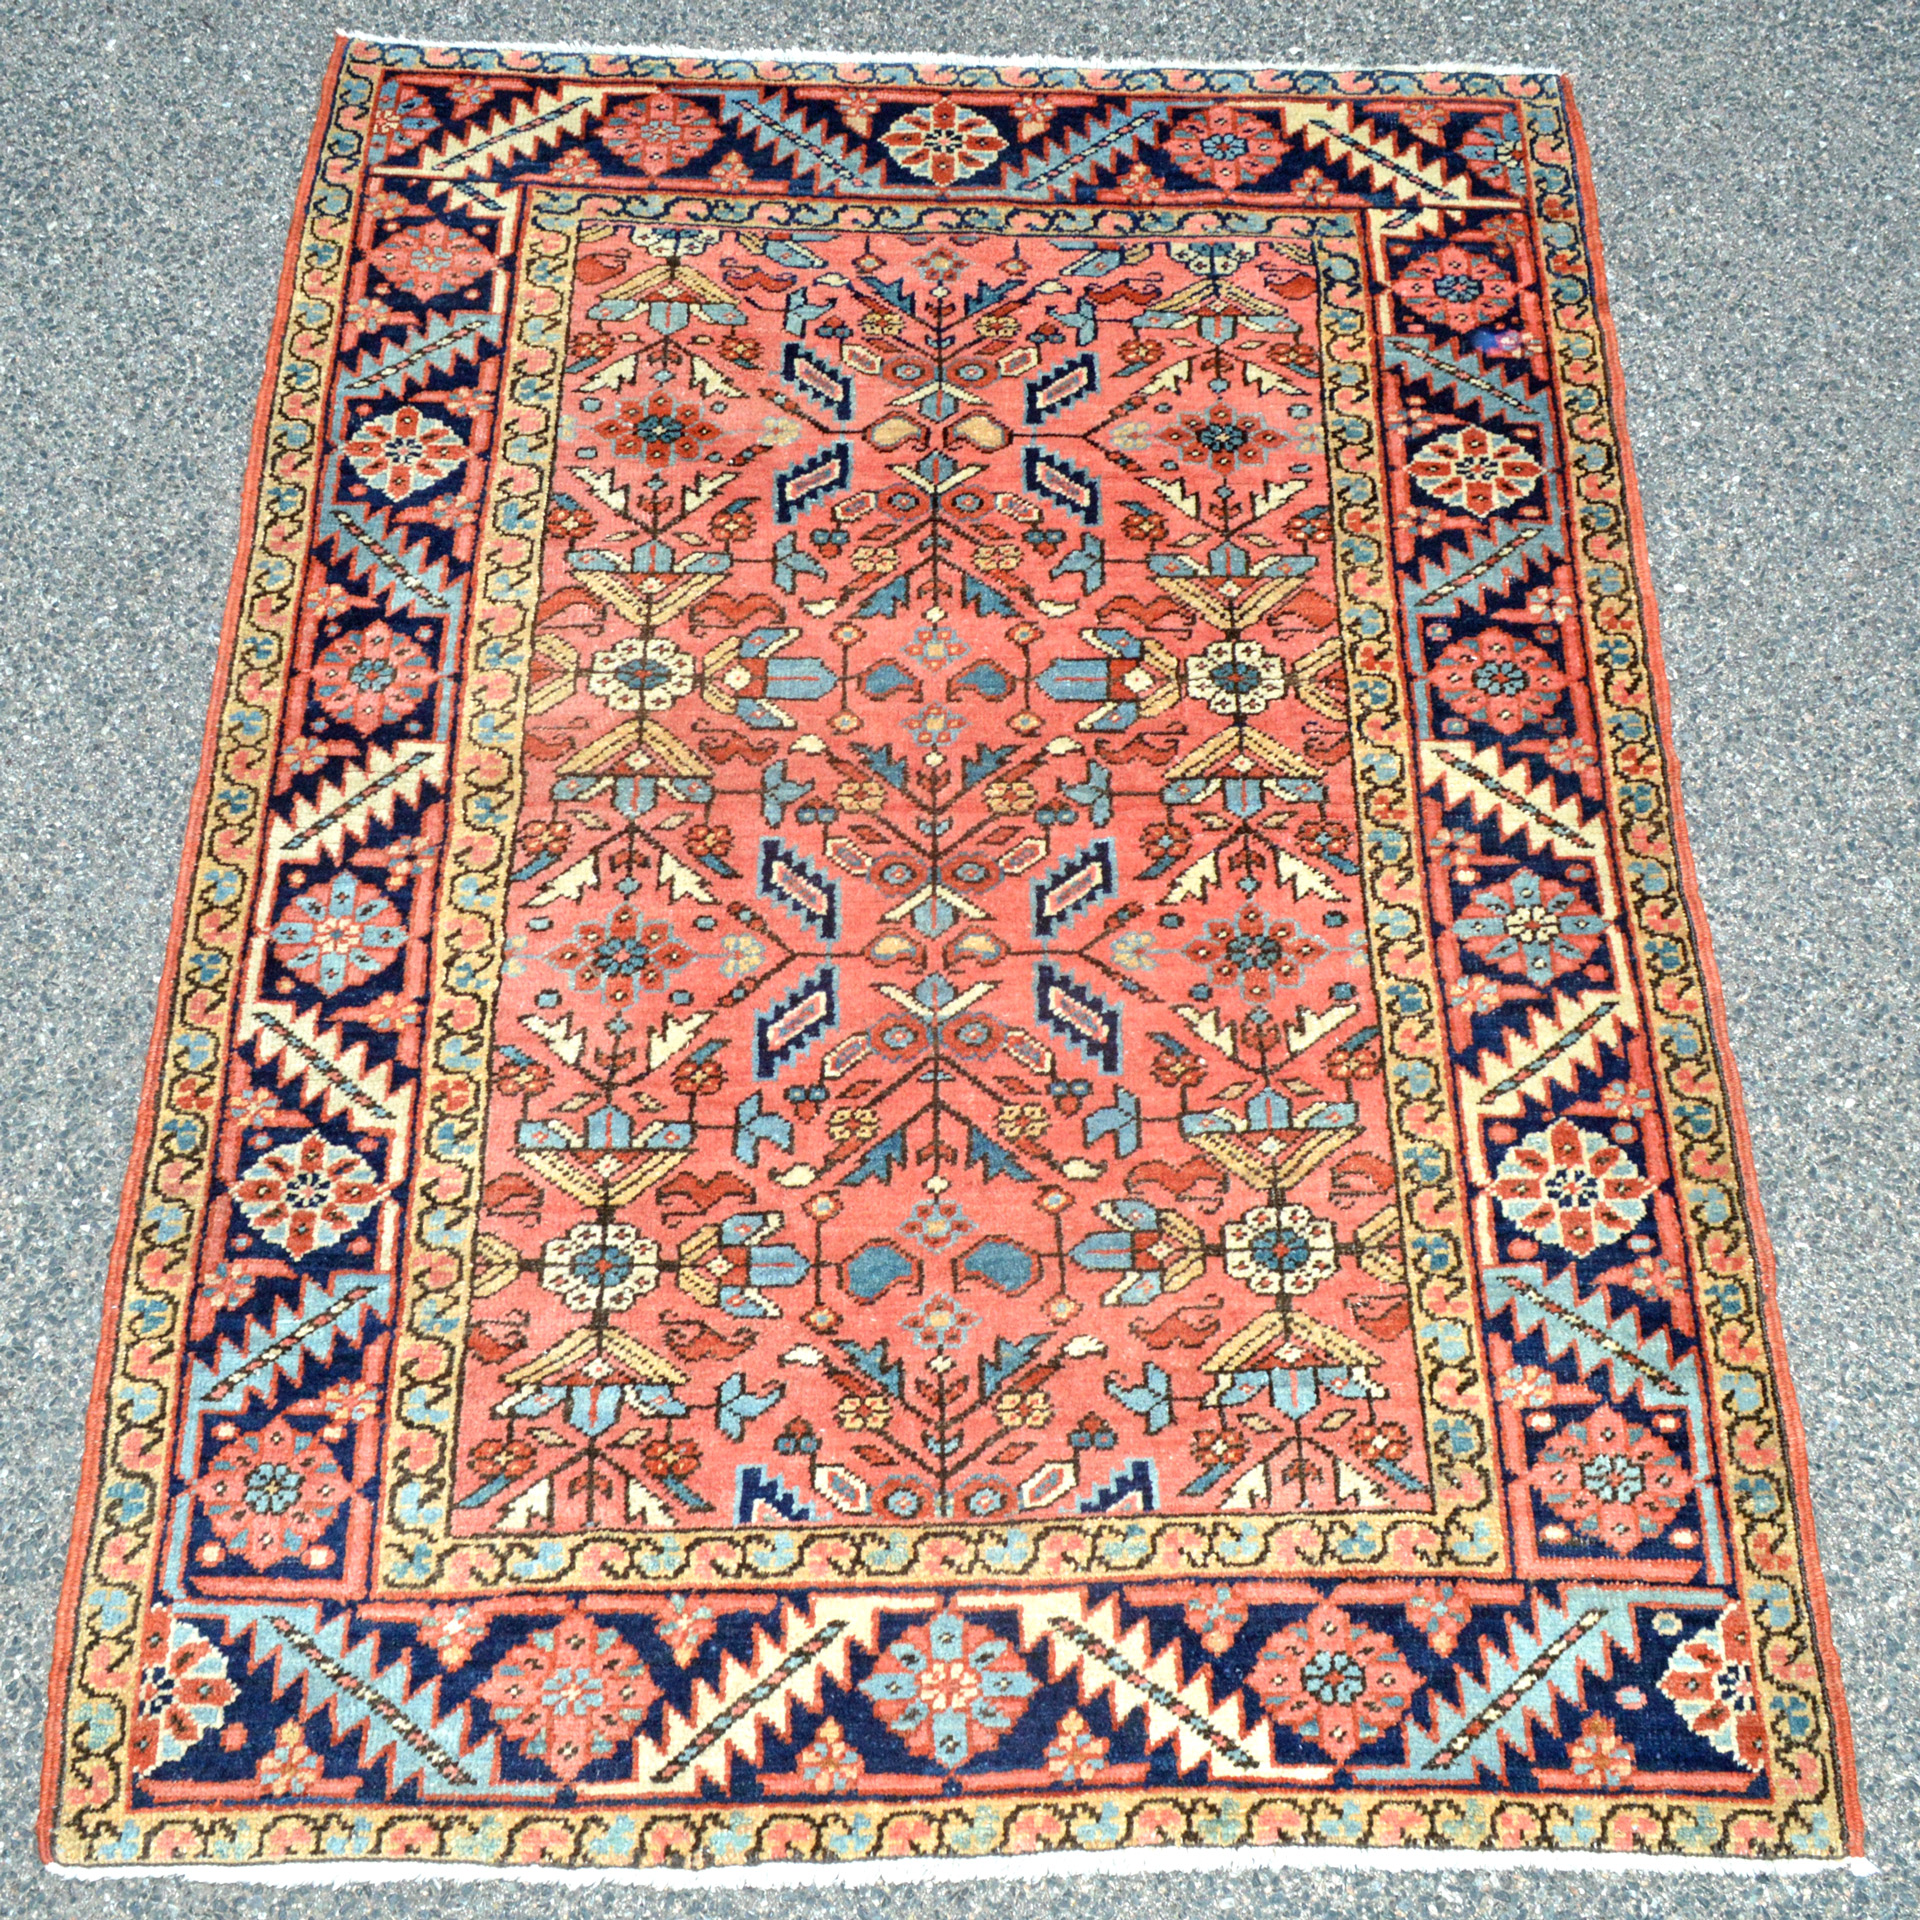 Douglas Stock Gallery, antique Oriental rugs South Natick, Massachusetts New England, an antique Persian Heriz rug with an uncommon coral color field and an all-over design of stylized leaves and flowers that is framed by a navy blue border, circa 1920.